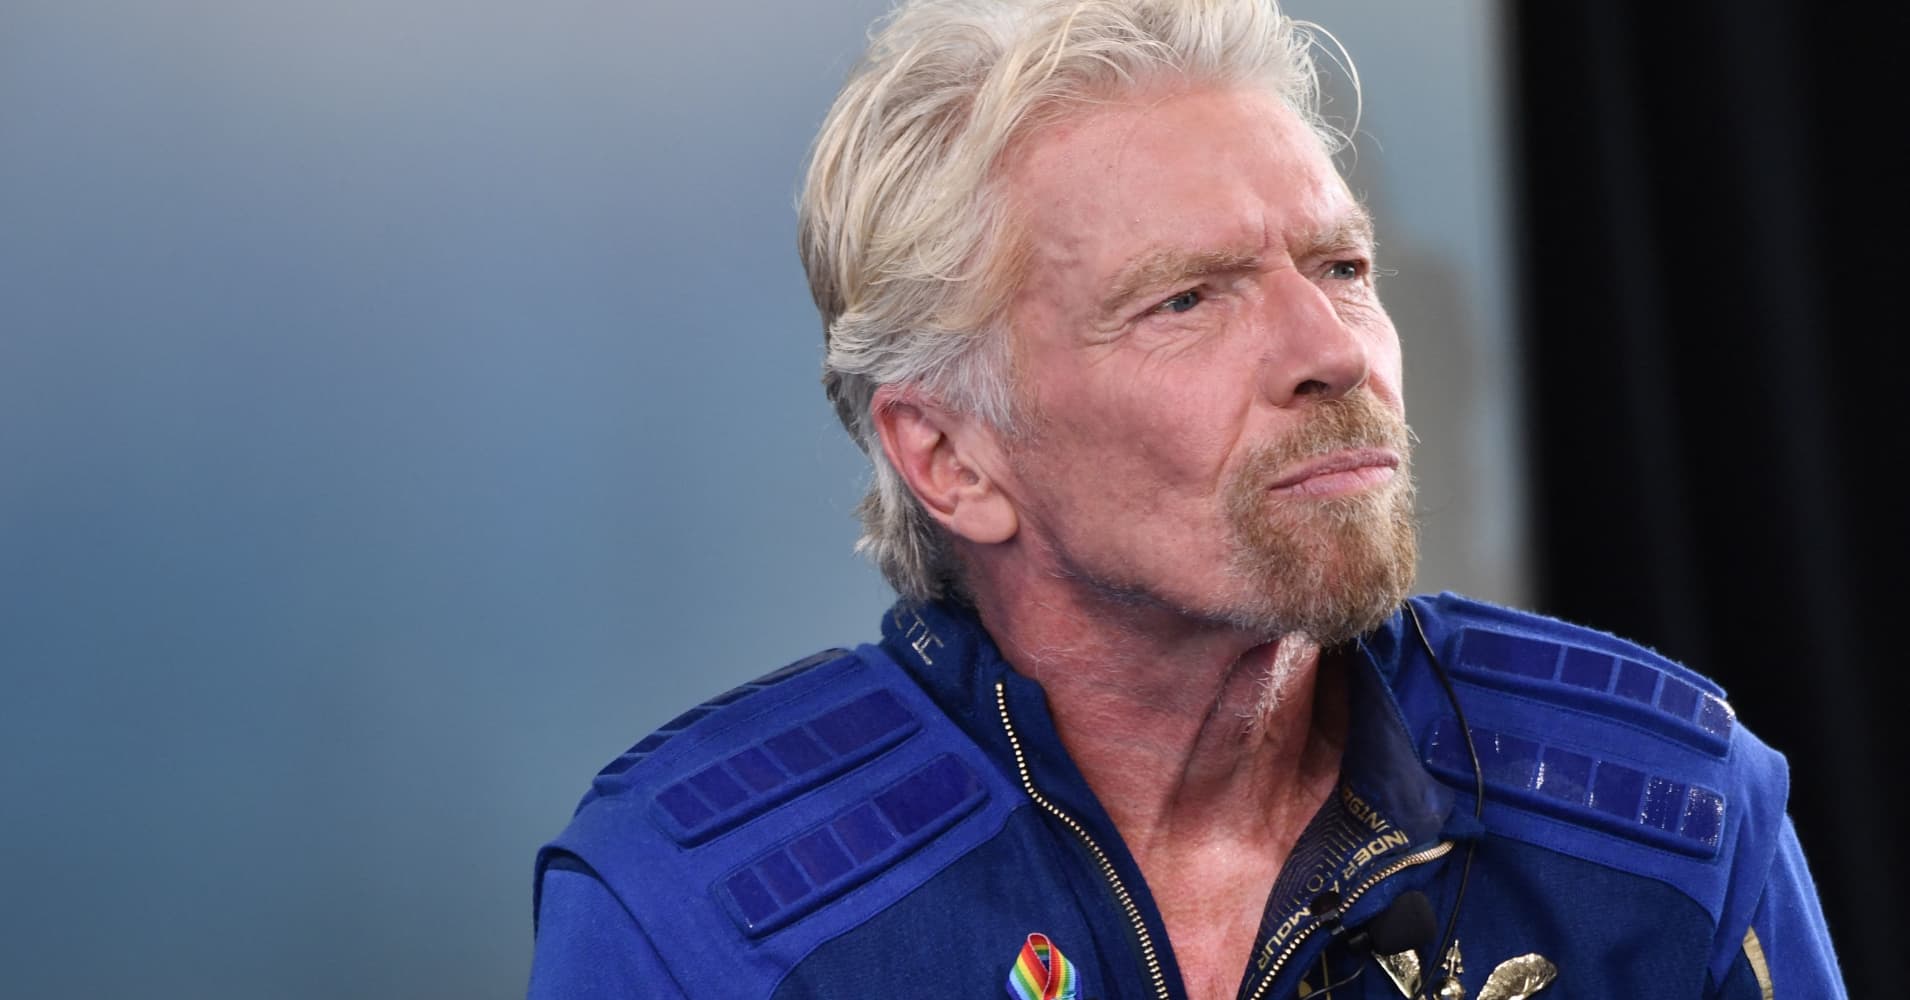 richard branson and oppenheimer's grandson urge action to stop ai and climate 'catastrophe'